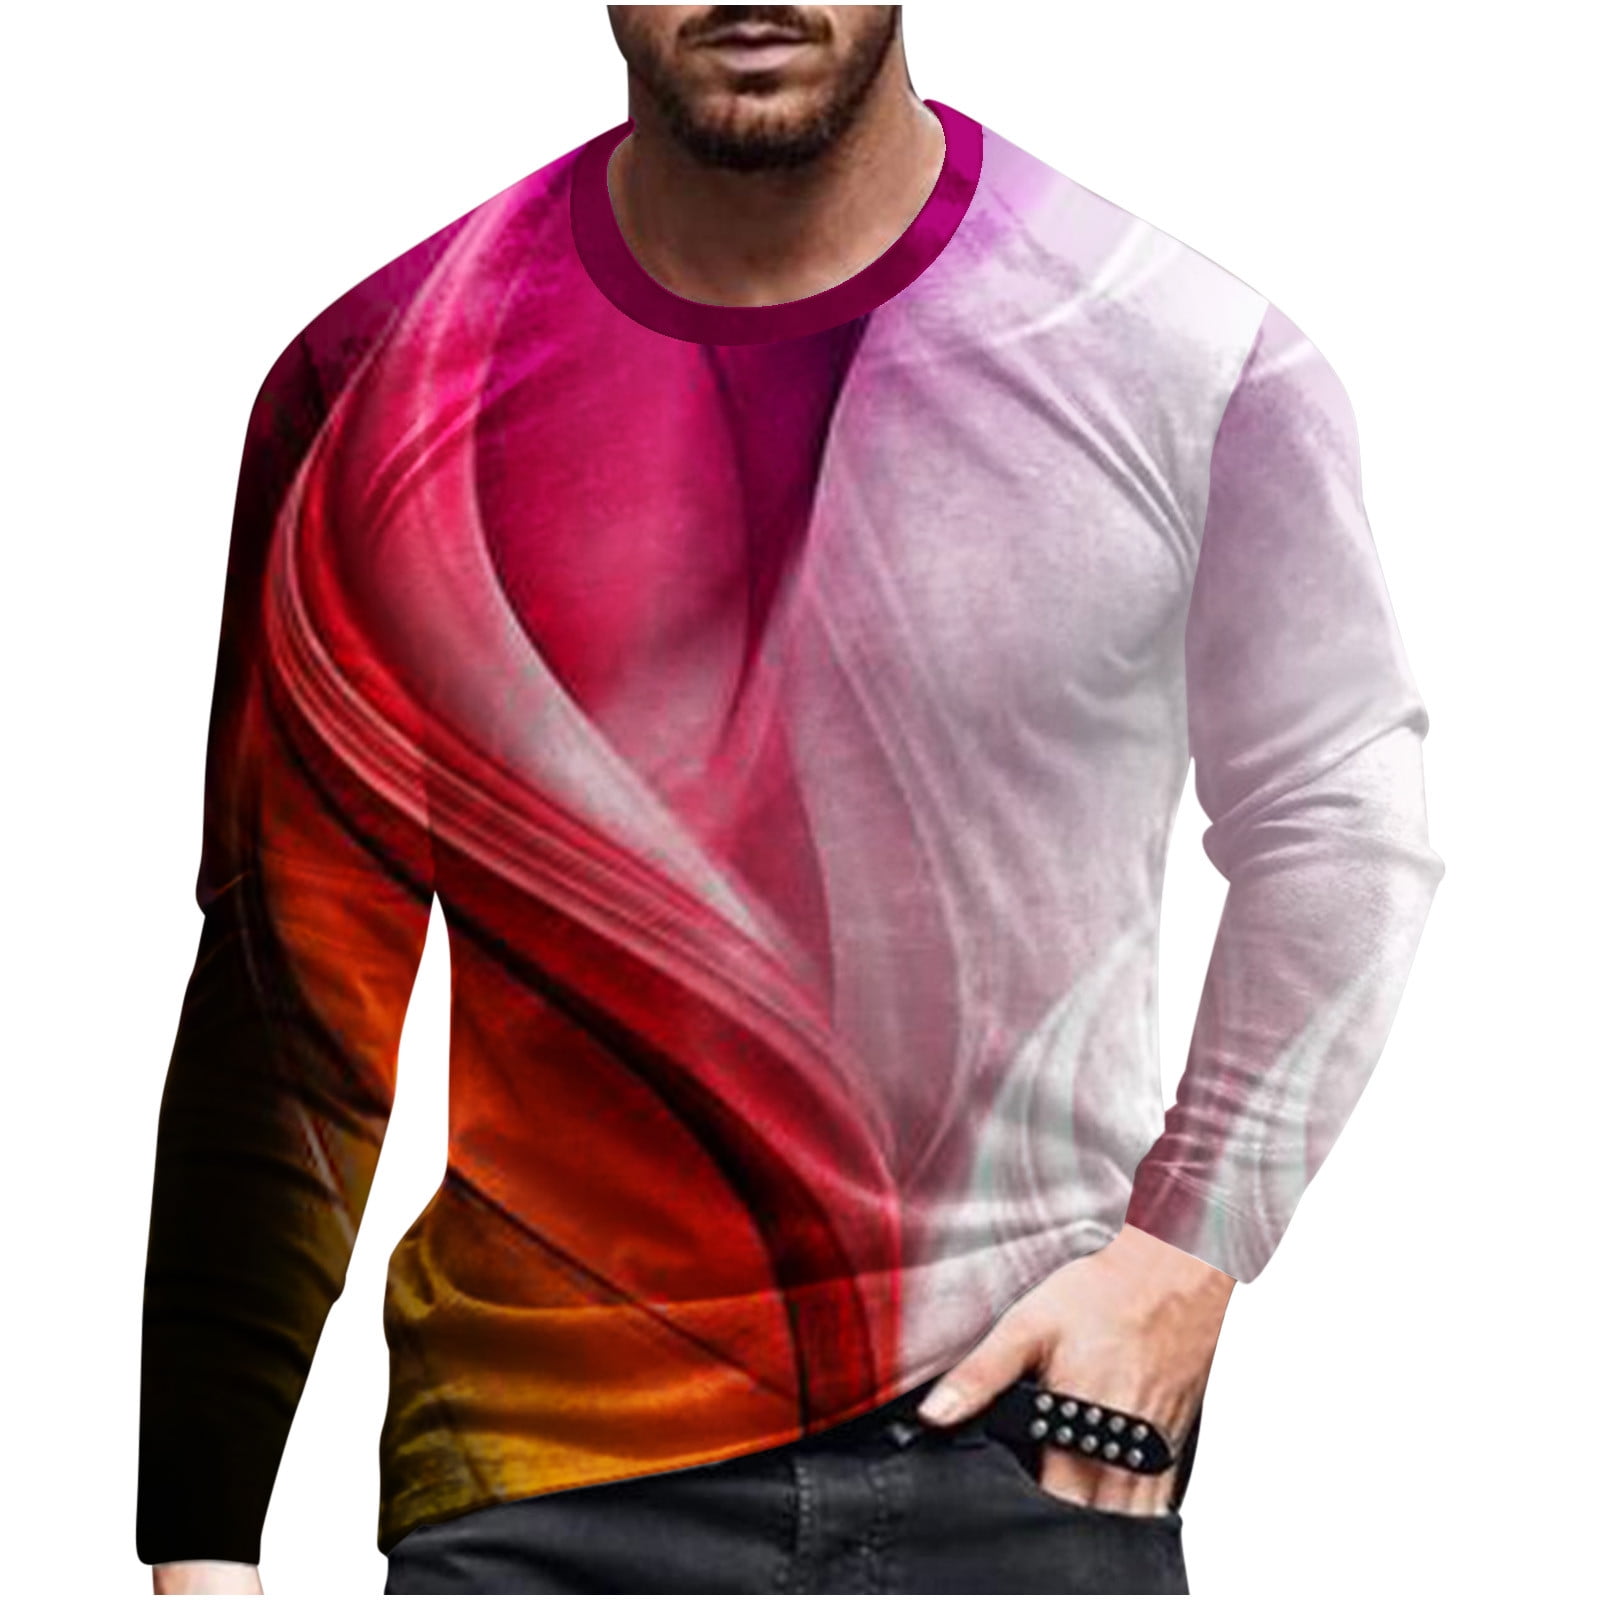 Stay Ahead of the Fashion Game with the Full Sleeve Printed Round Neck  T-Shirt - Made with a Soft Cotton Blend for Unmatched Comfort and Style  mens